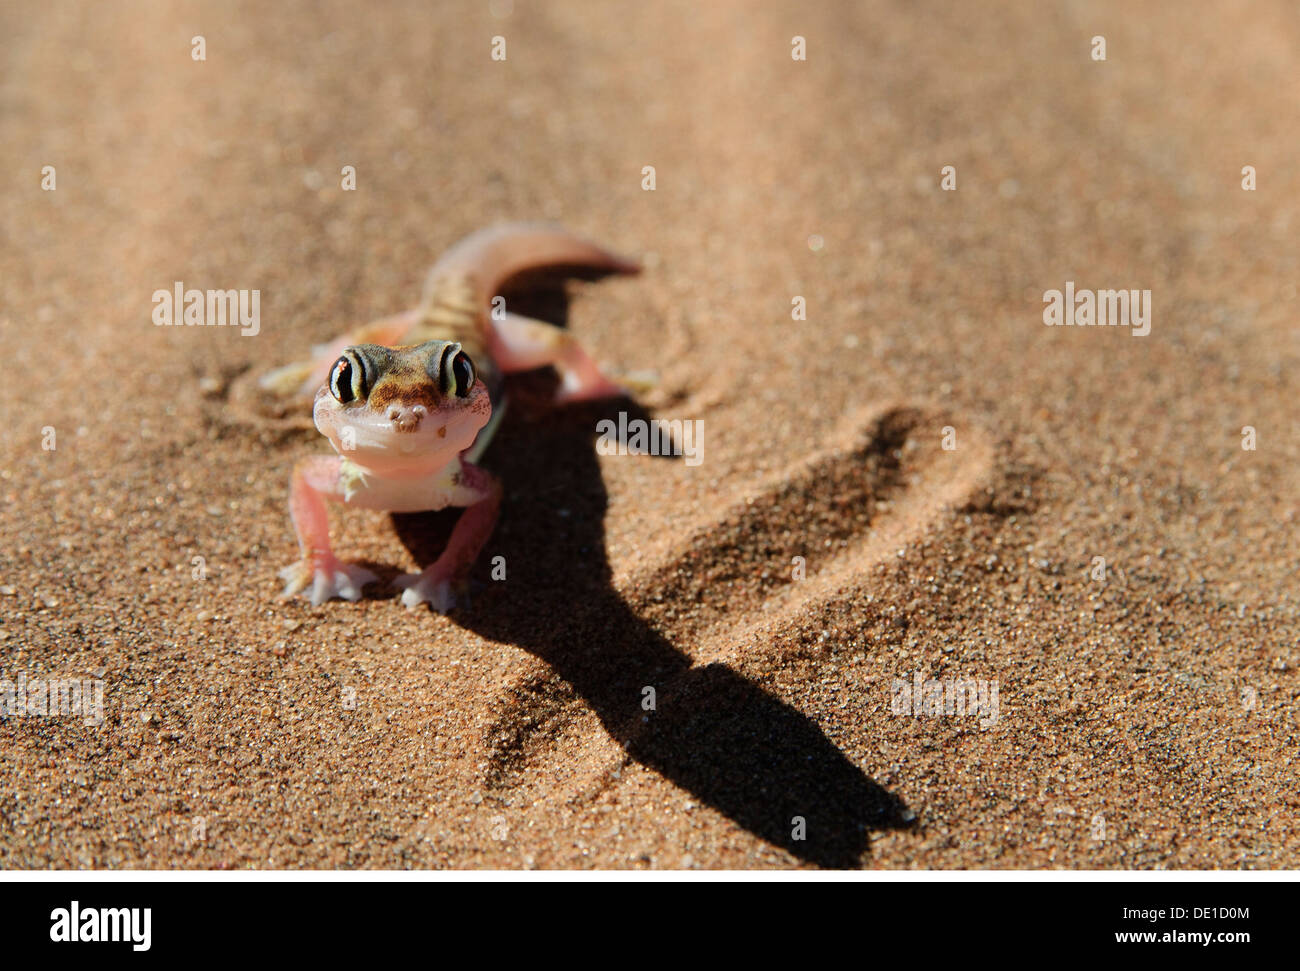 Zoologie/Tiere, Reptilien, Gecko, Web-footed Gecko, (palmatogecko rangei), Wüste Namib, Namibia, Afrika, Additional-Rights - Clearance-Info - Not-Available Stockfoto